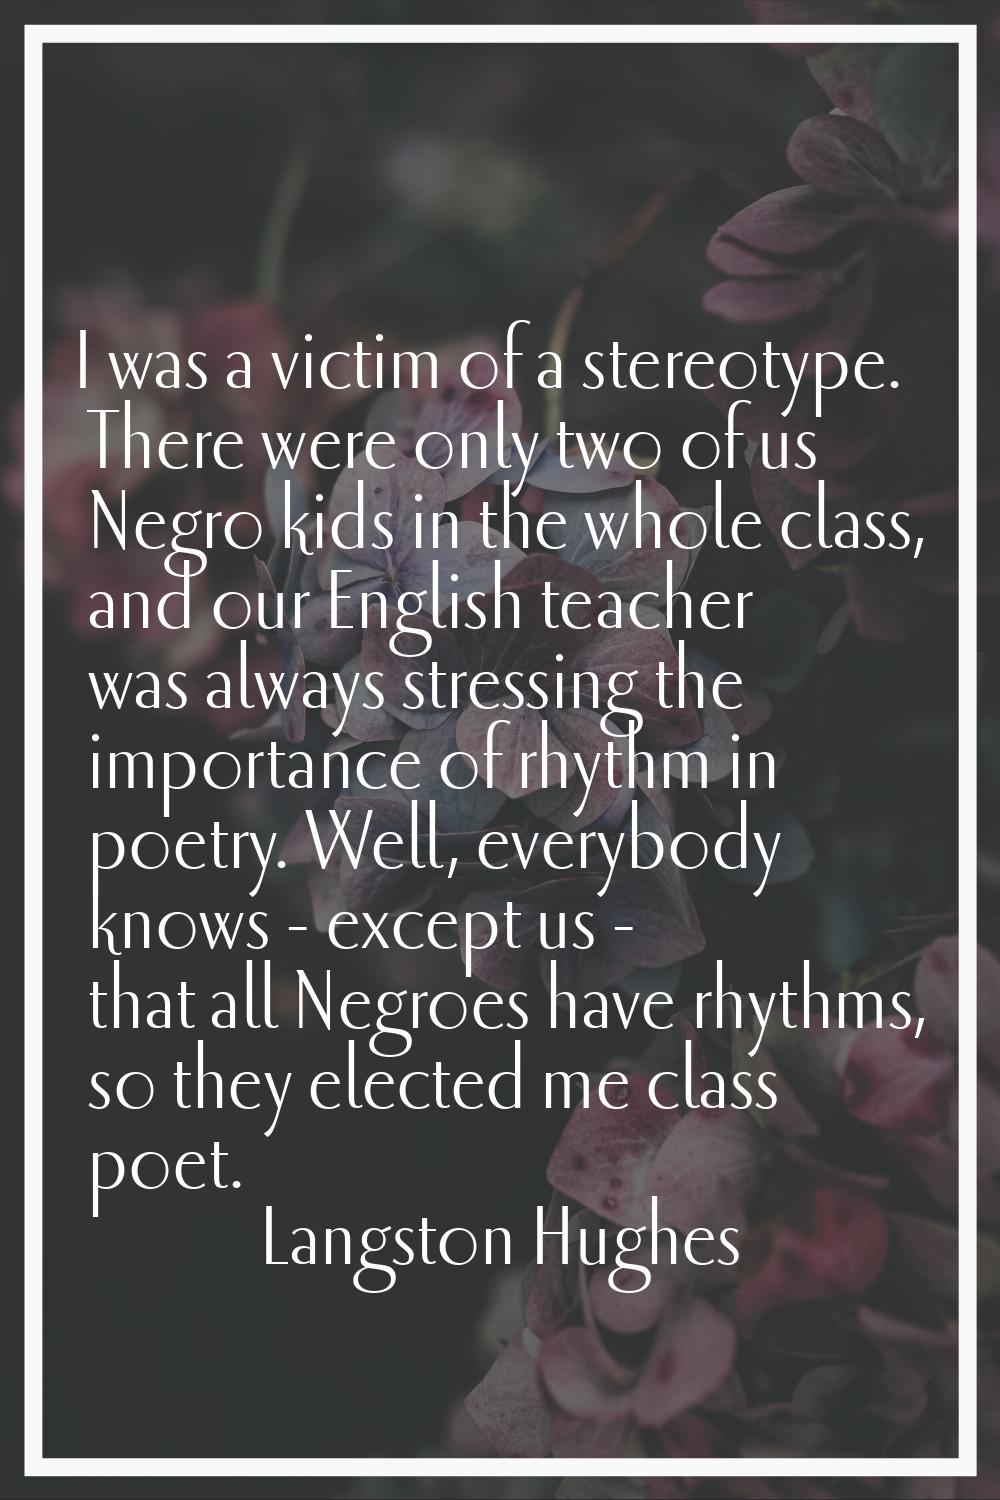 I was a victim of a stereotype. There were only two of us Negro kids in the whole class, and our En